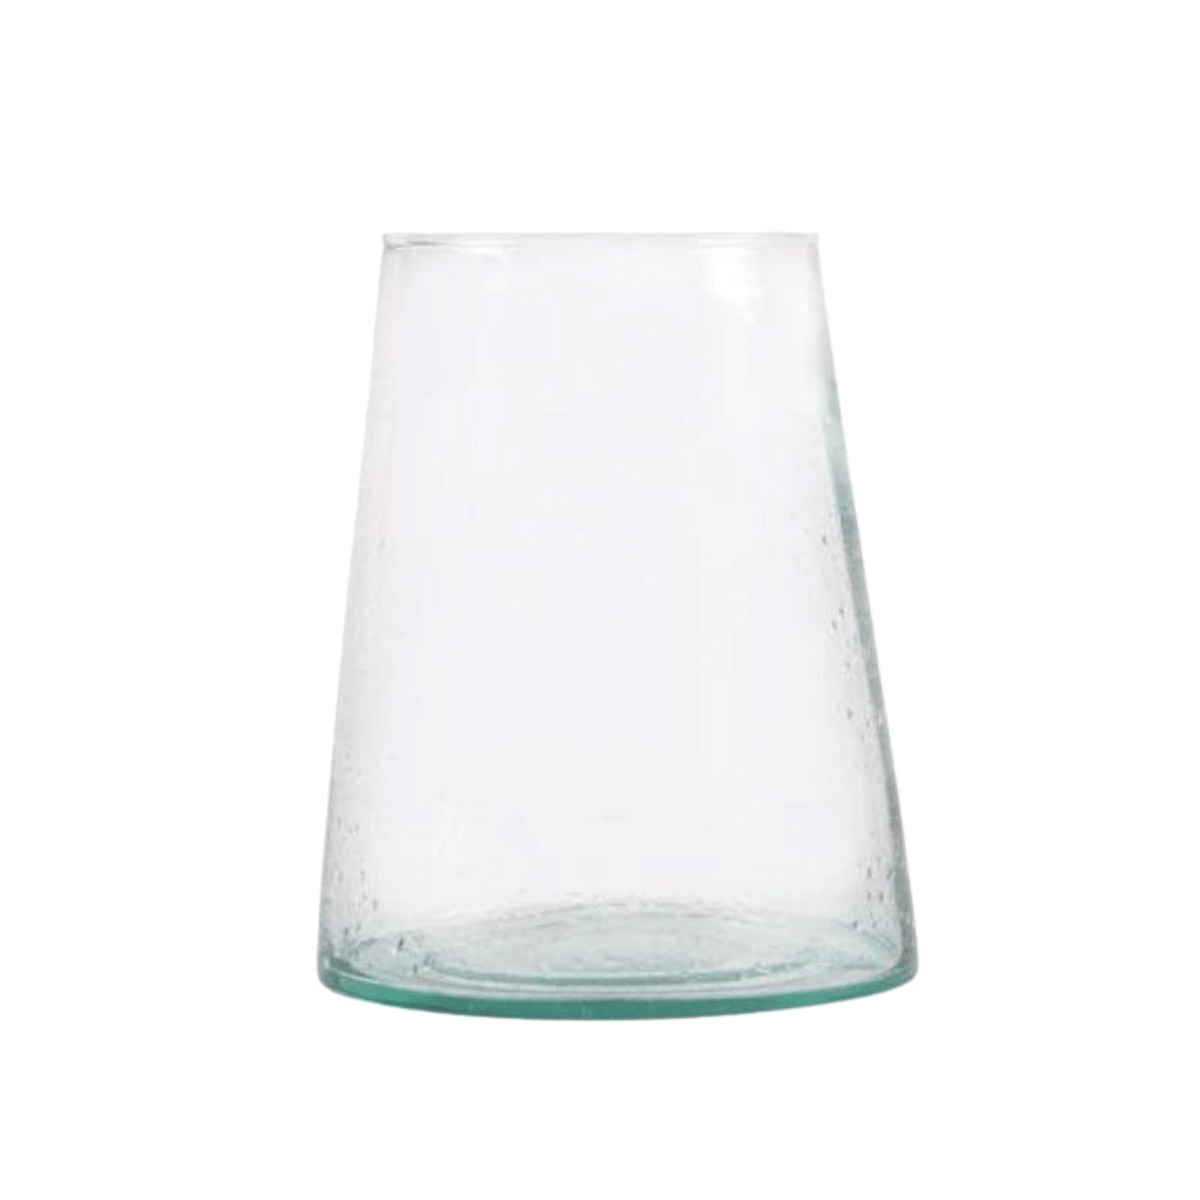 CLEAR GLASS VASE